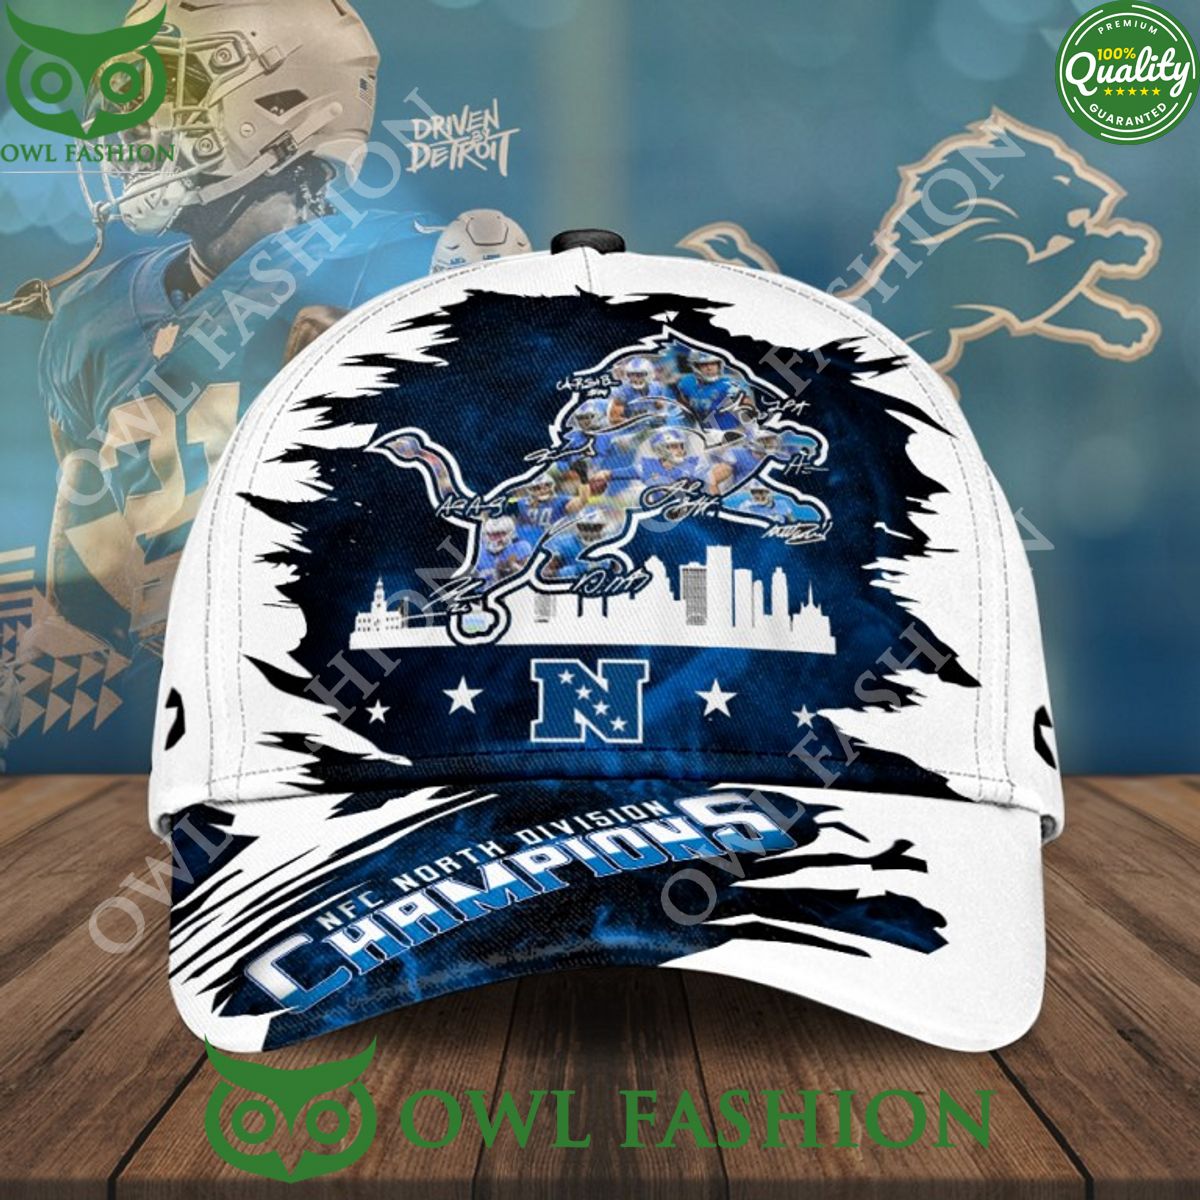 Driven by Detroit Lions NFC North Division Champions Pro bowlers classic printed cap